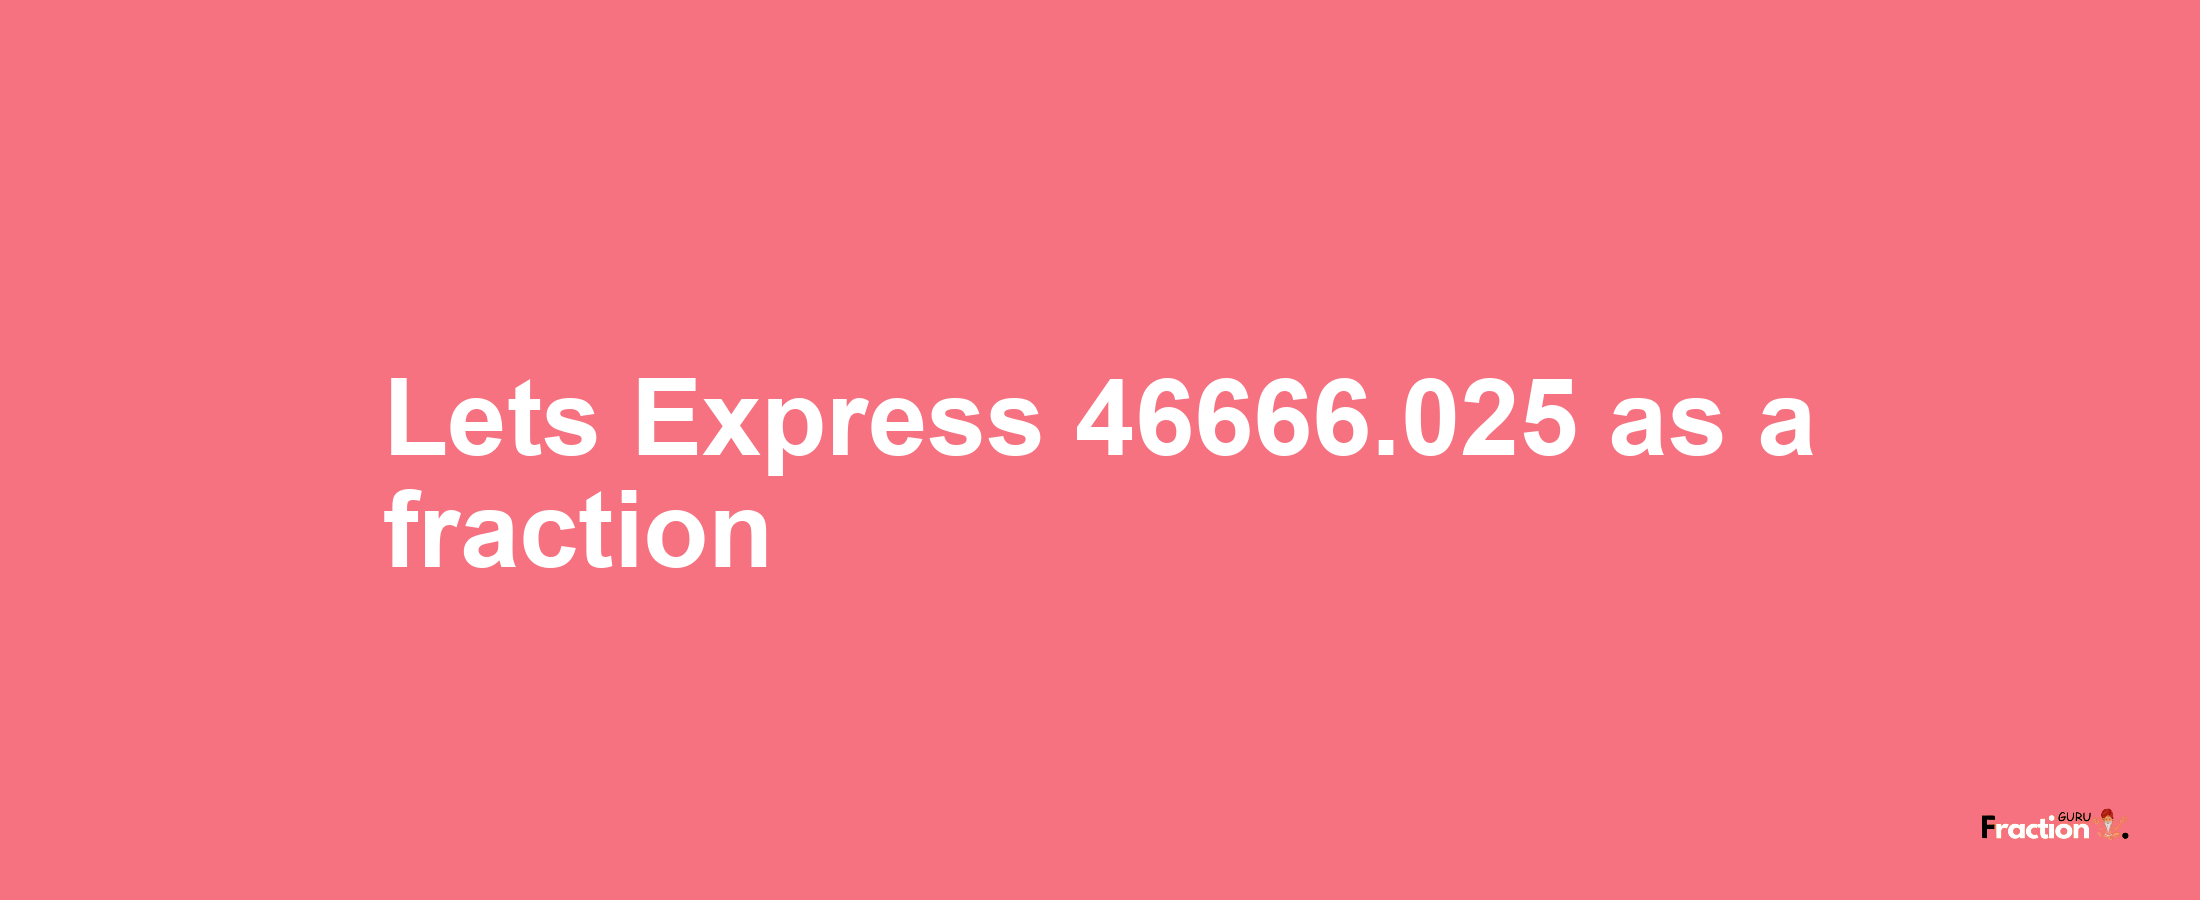 Lets Express 46666.025 as afraction